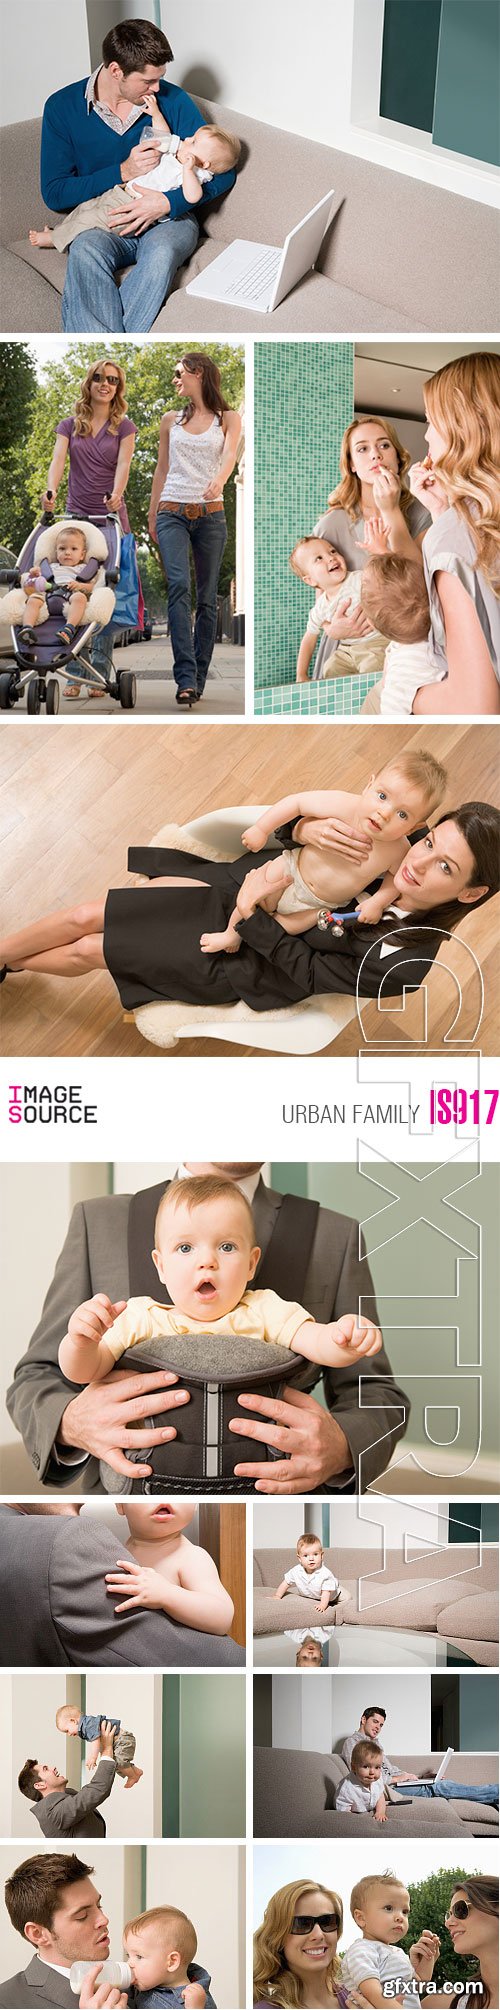 Image Source IS917 Urban Family